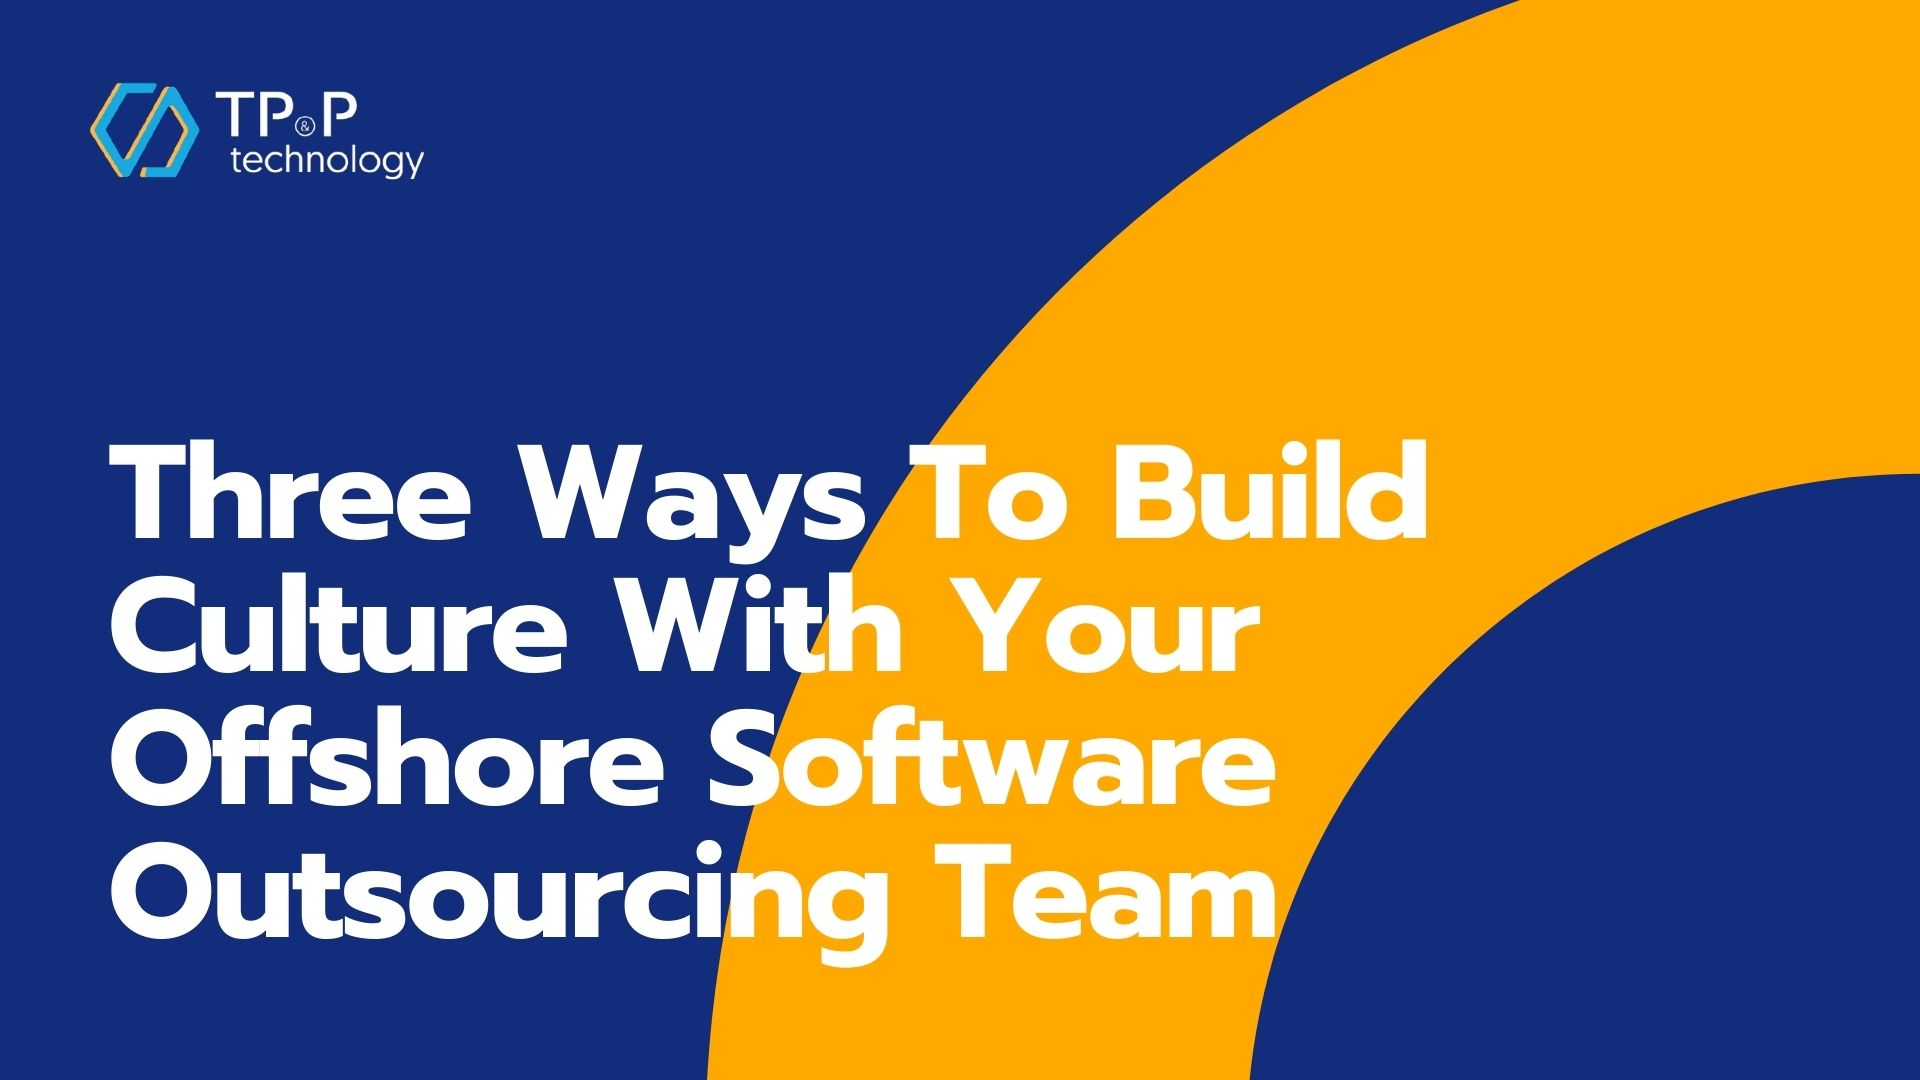 Three Ways To Build Culture With Your Offshore Software Outsourcing Team